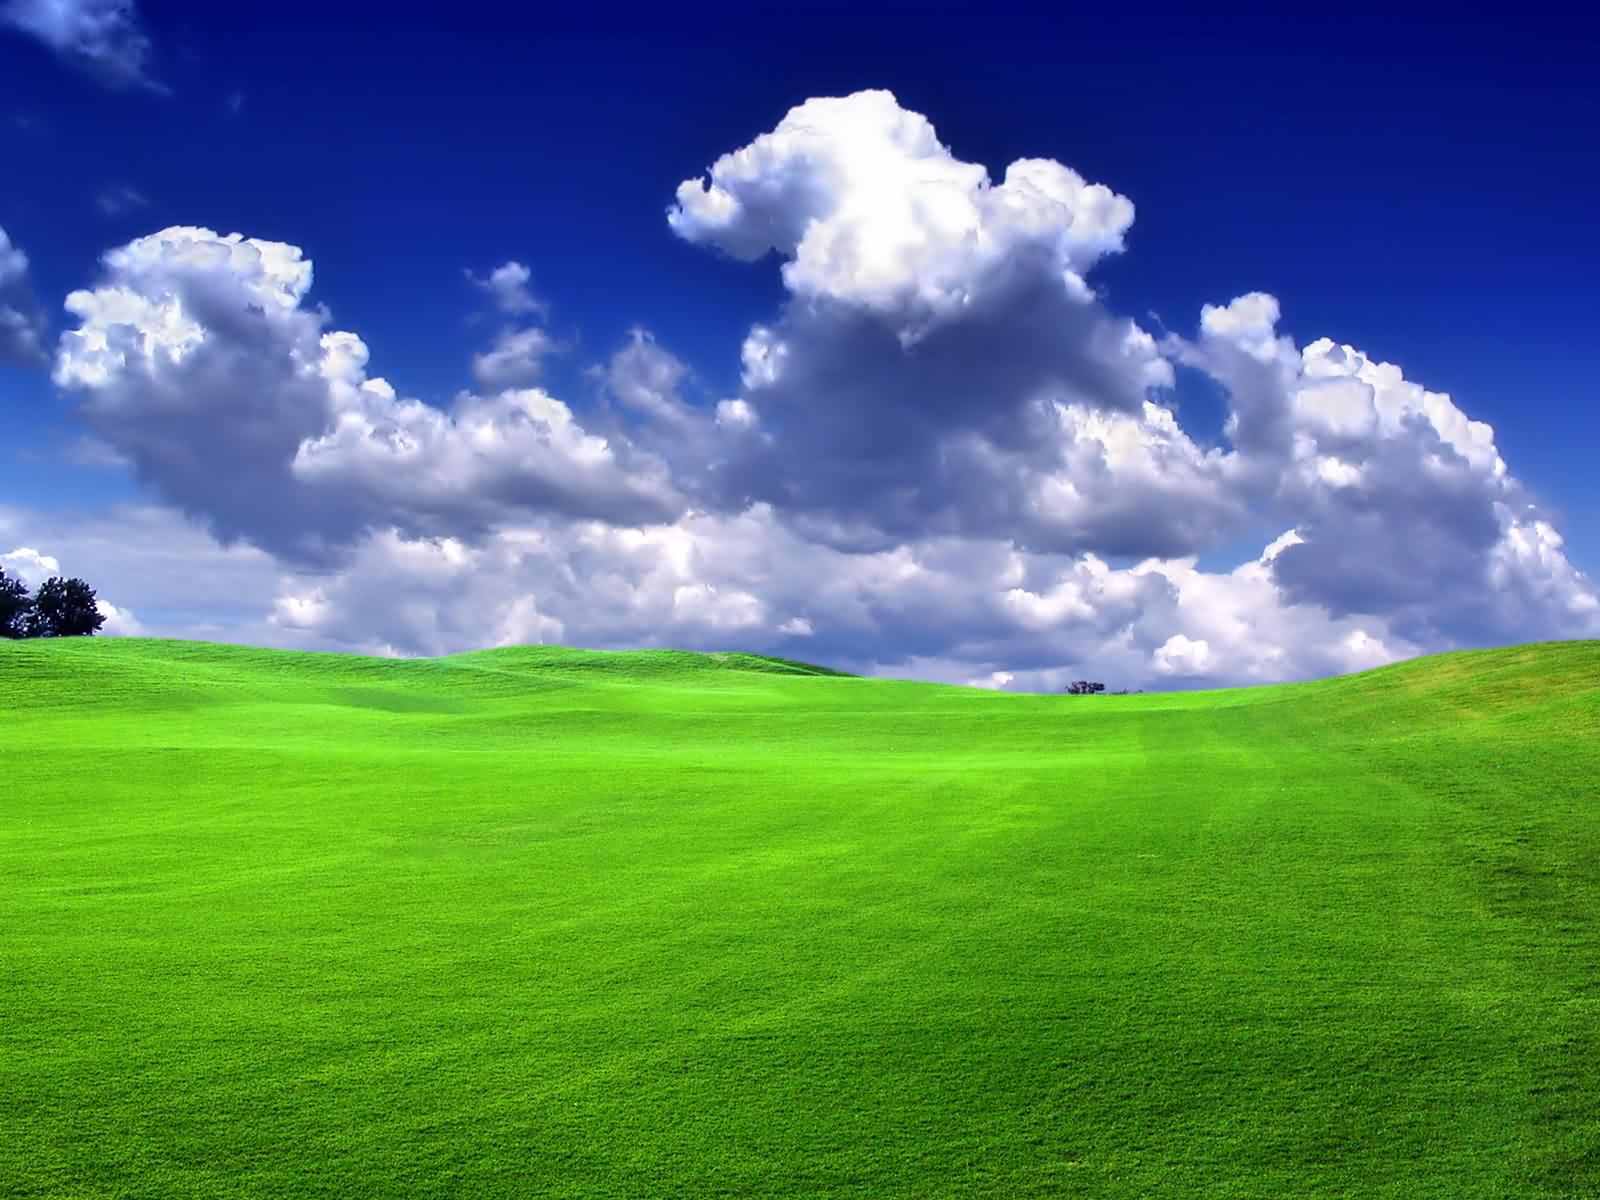 Nature Wallpapers For Desktop High Definition Wallpapers